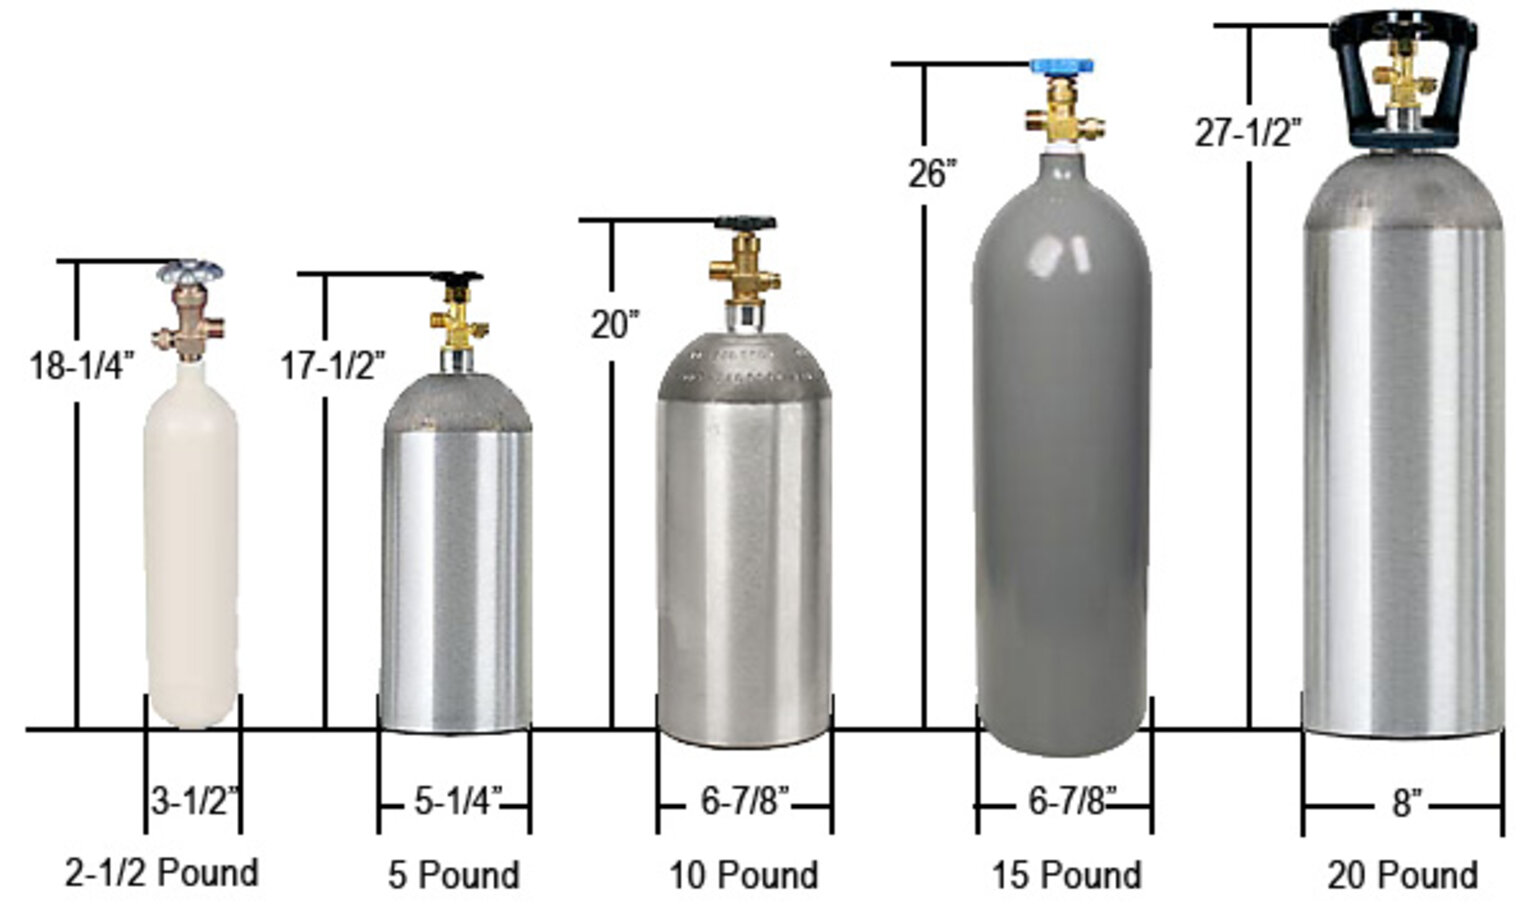 Where To Fill Co2 Tank For Blairsville Kegerator